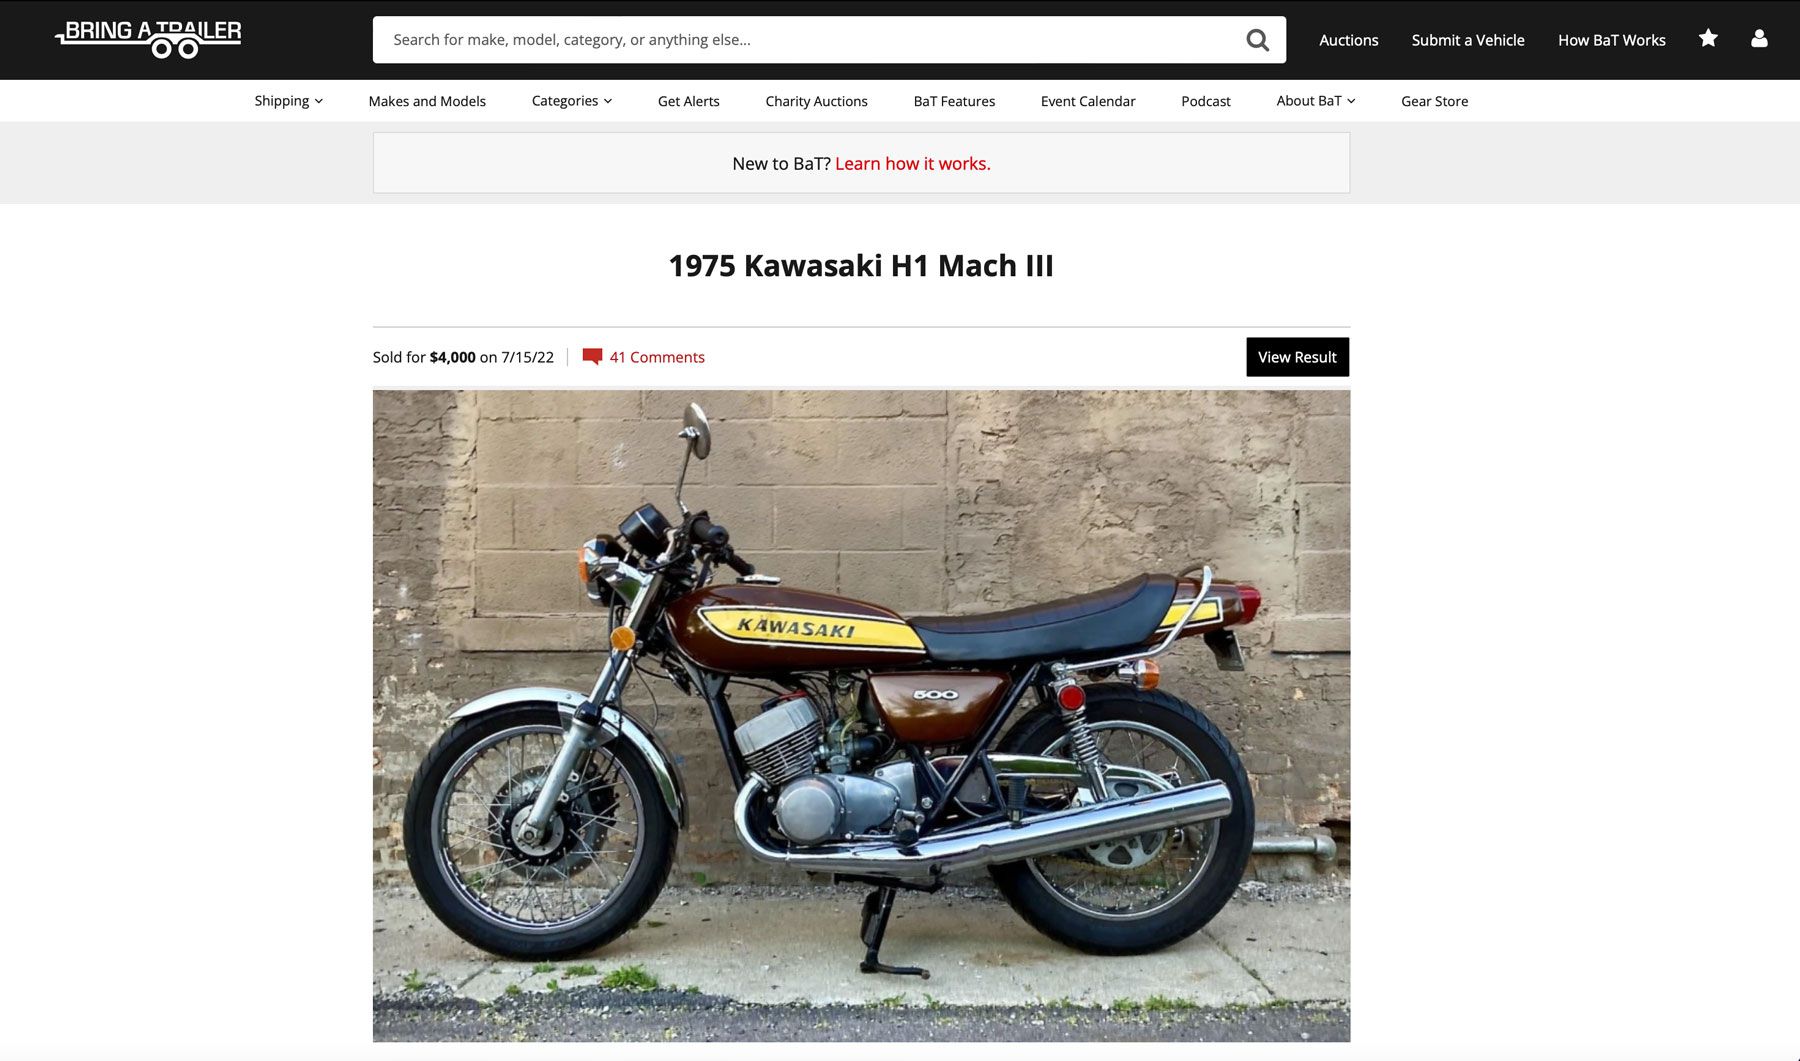 You missed out: the already-sold 1975 Kawasaki H1F/D.